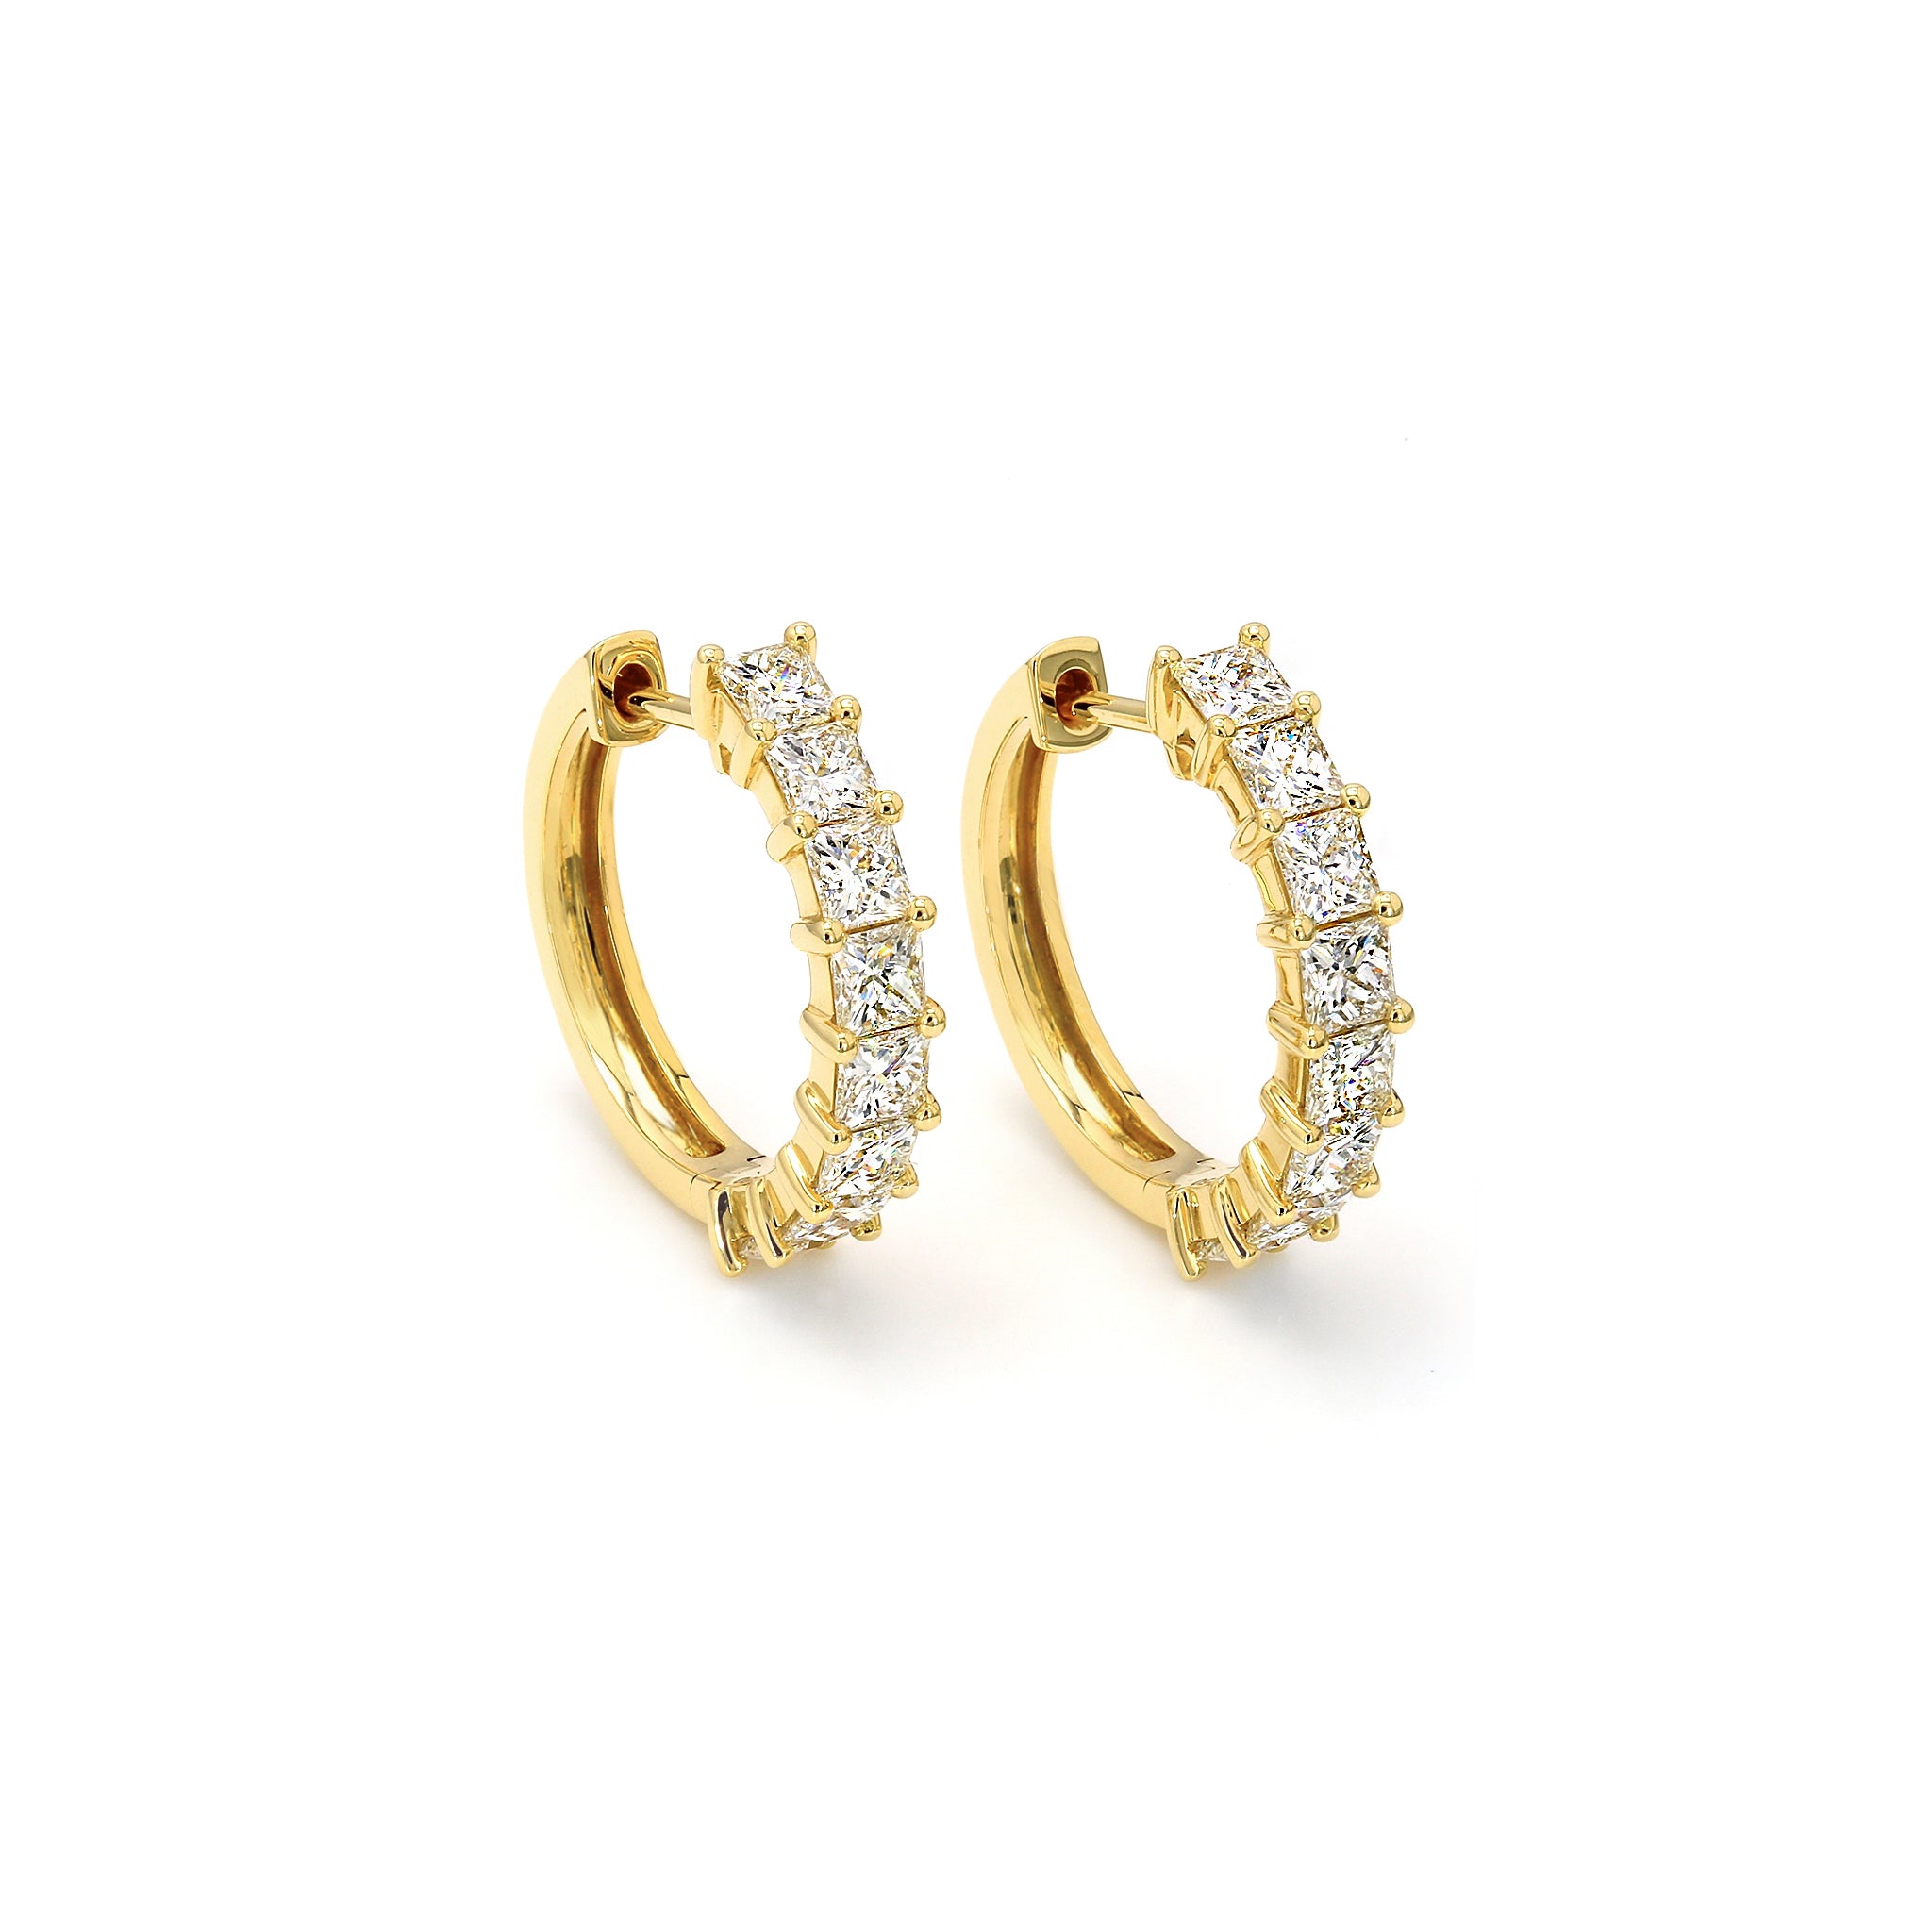 Shimansky - My Girl Claw Set Diamond Huggie Earrings 2.00ct Crafted in 18K Yellow Gold